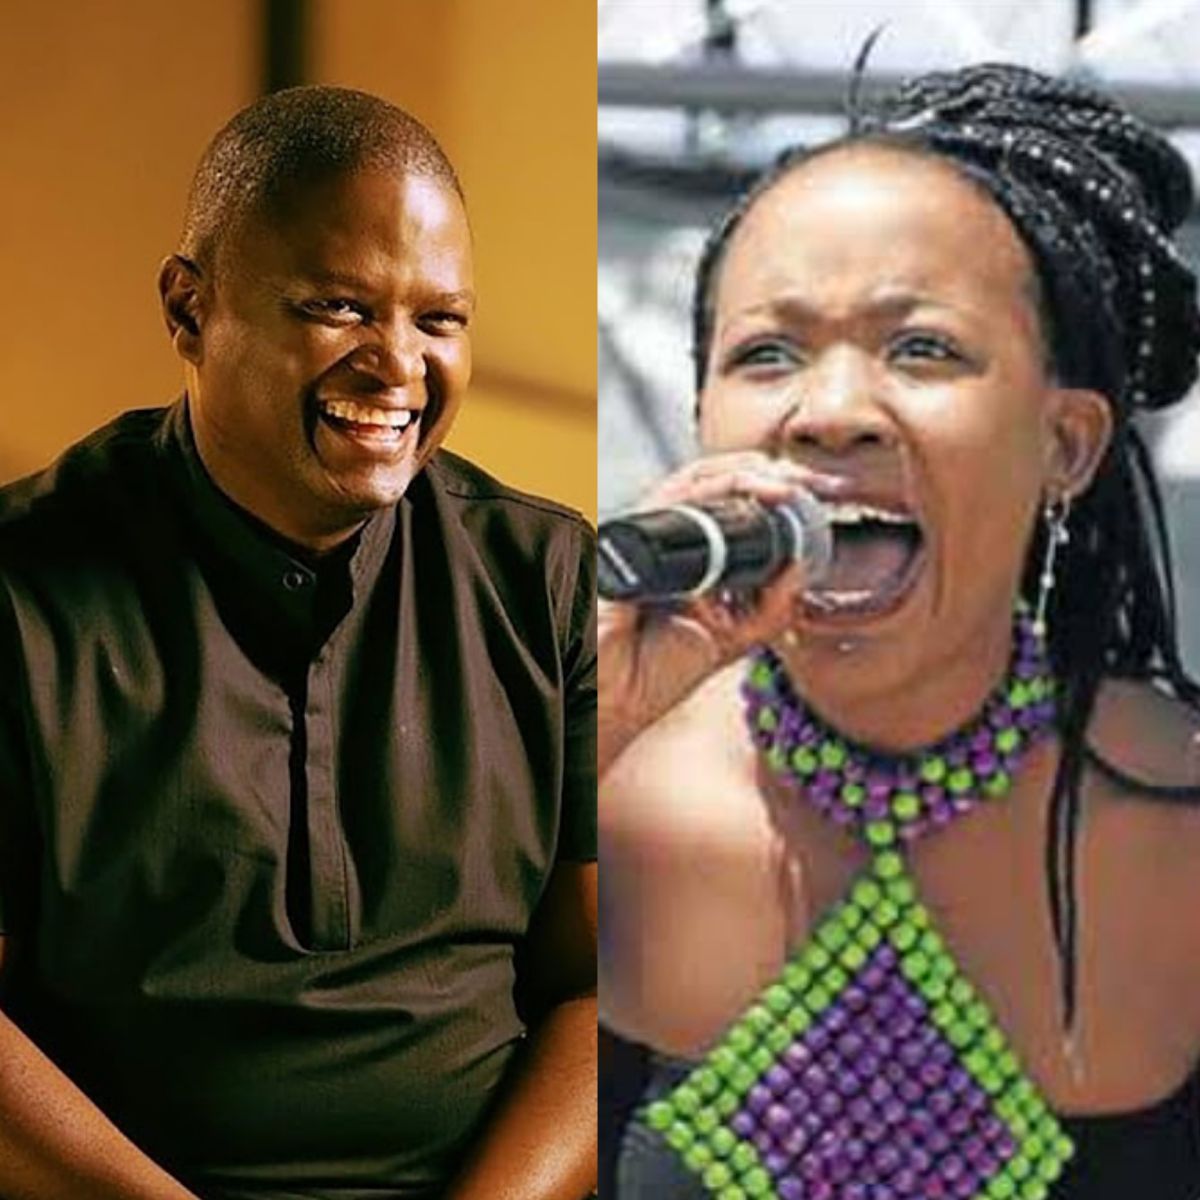 Music Executive, Vusi Leeuw, Throws Shade At Ntsiki Mazwai With A Subliminal Post After Her Allegations 1